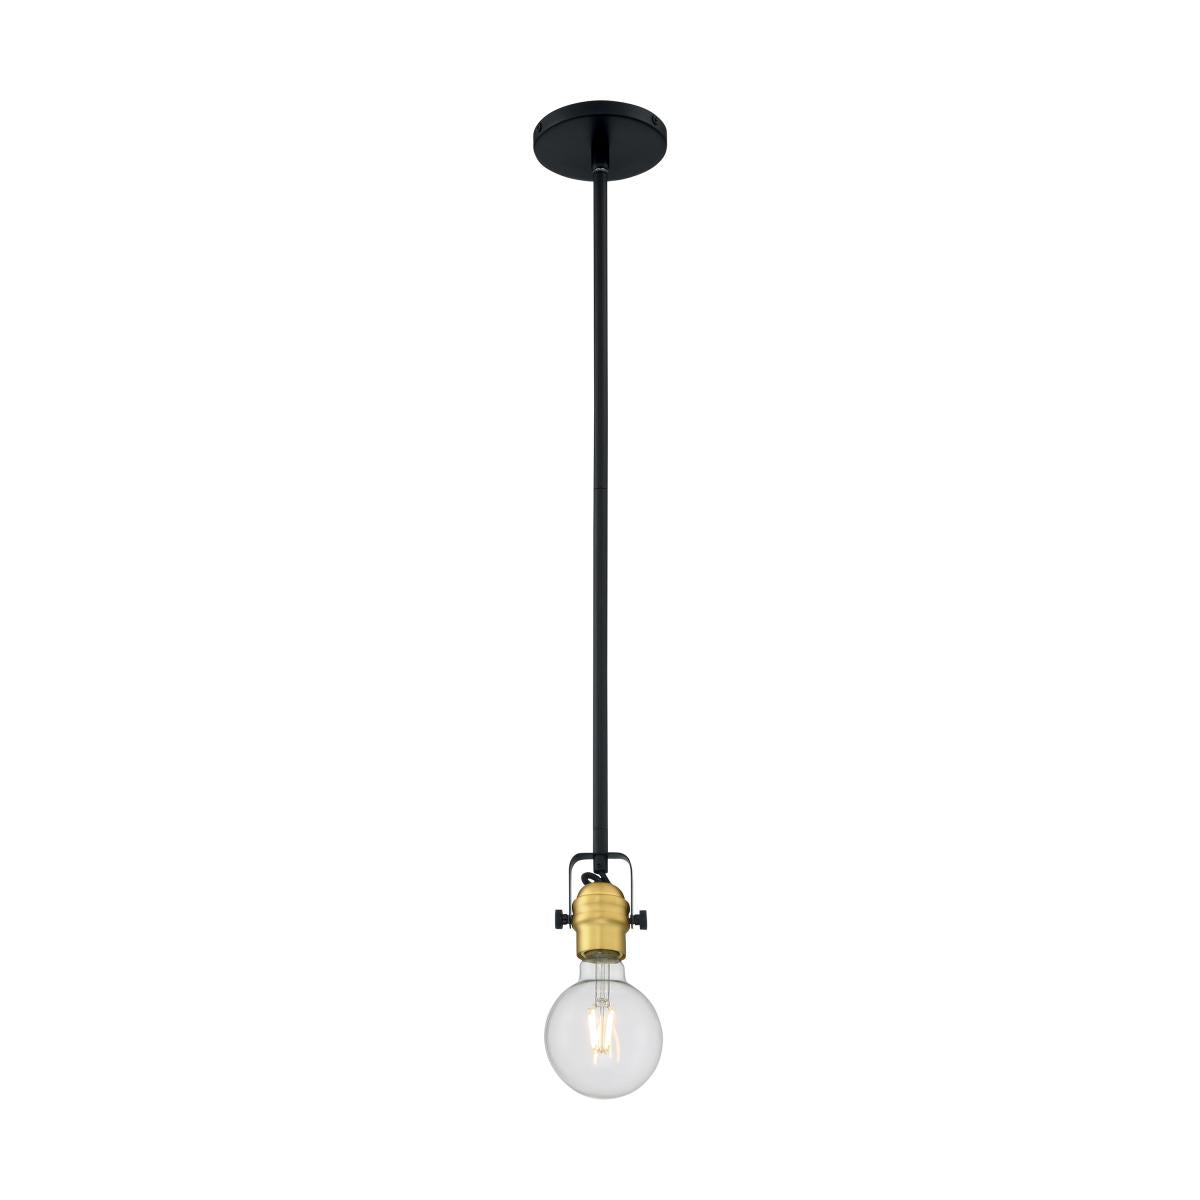 Mantra 1 Light Mini Pendant with Black and Brushed Brass Finish